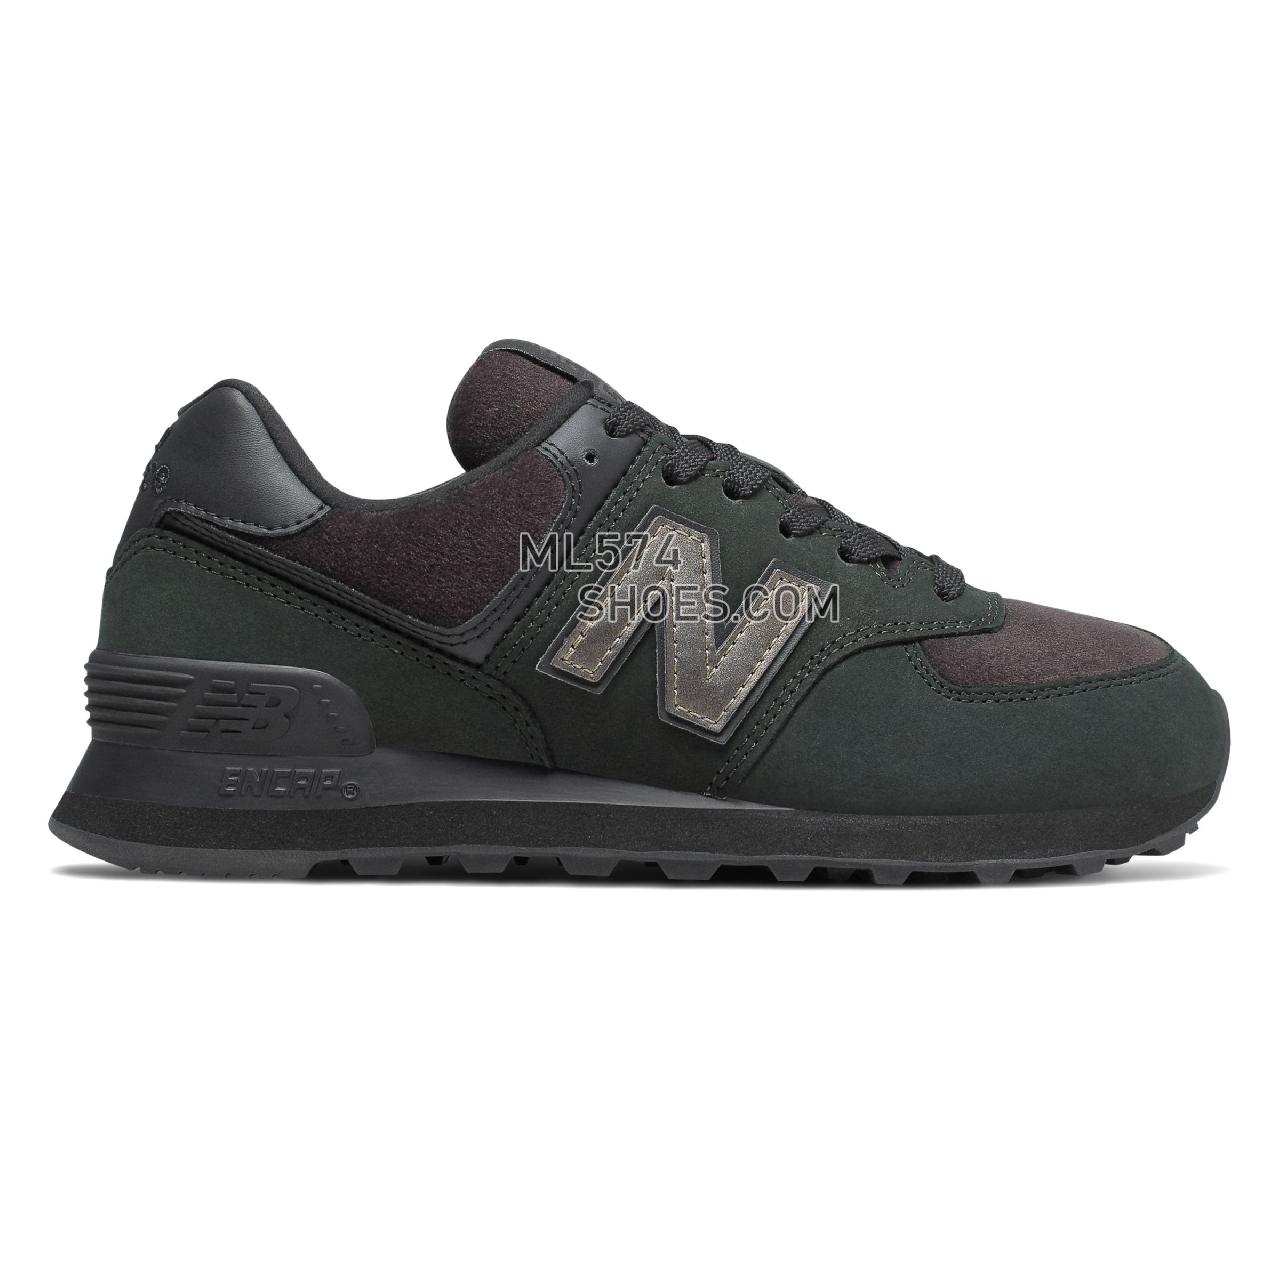 New Balance 574 - Women's Classic Sneakers - Black with Magnet - WL574LDG